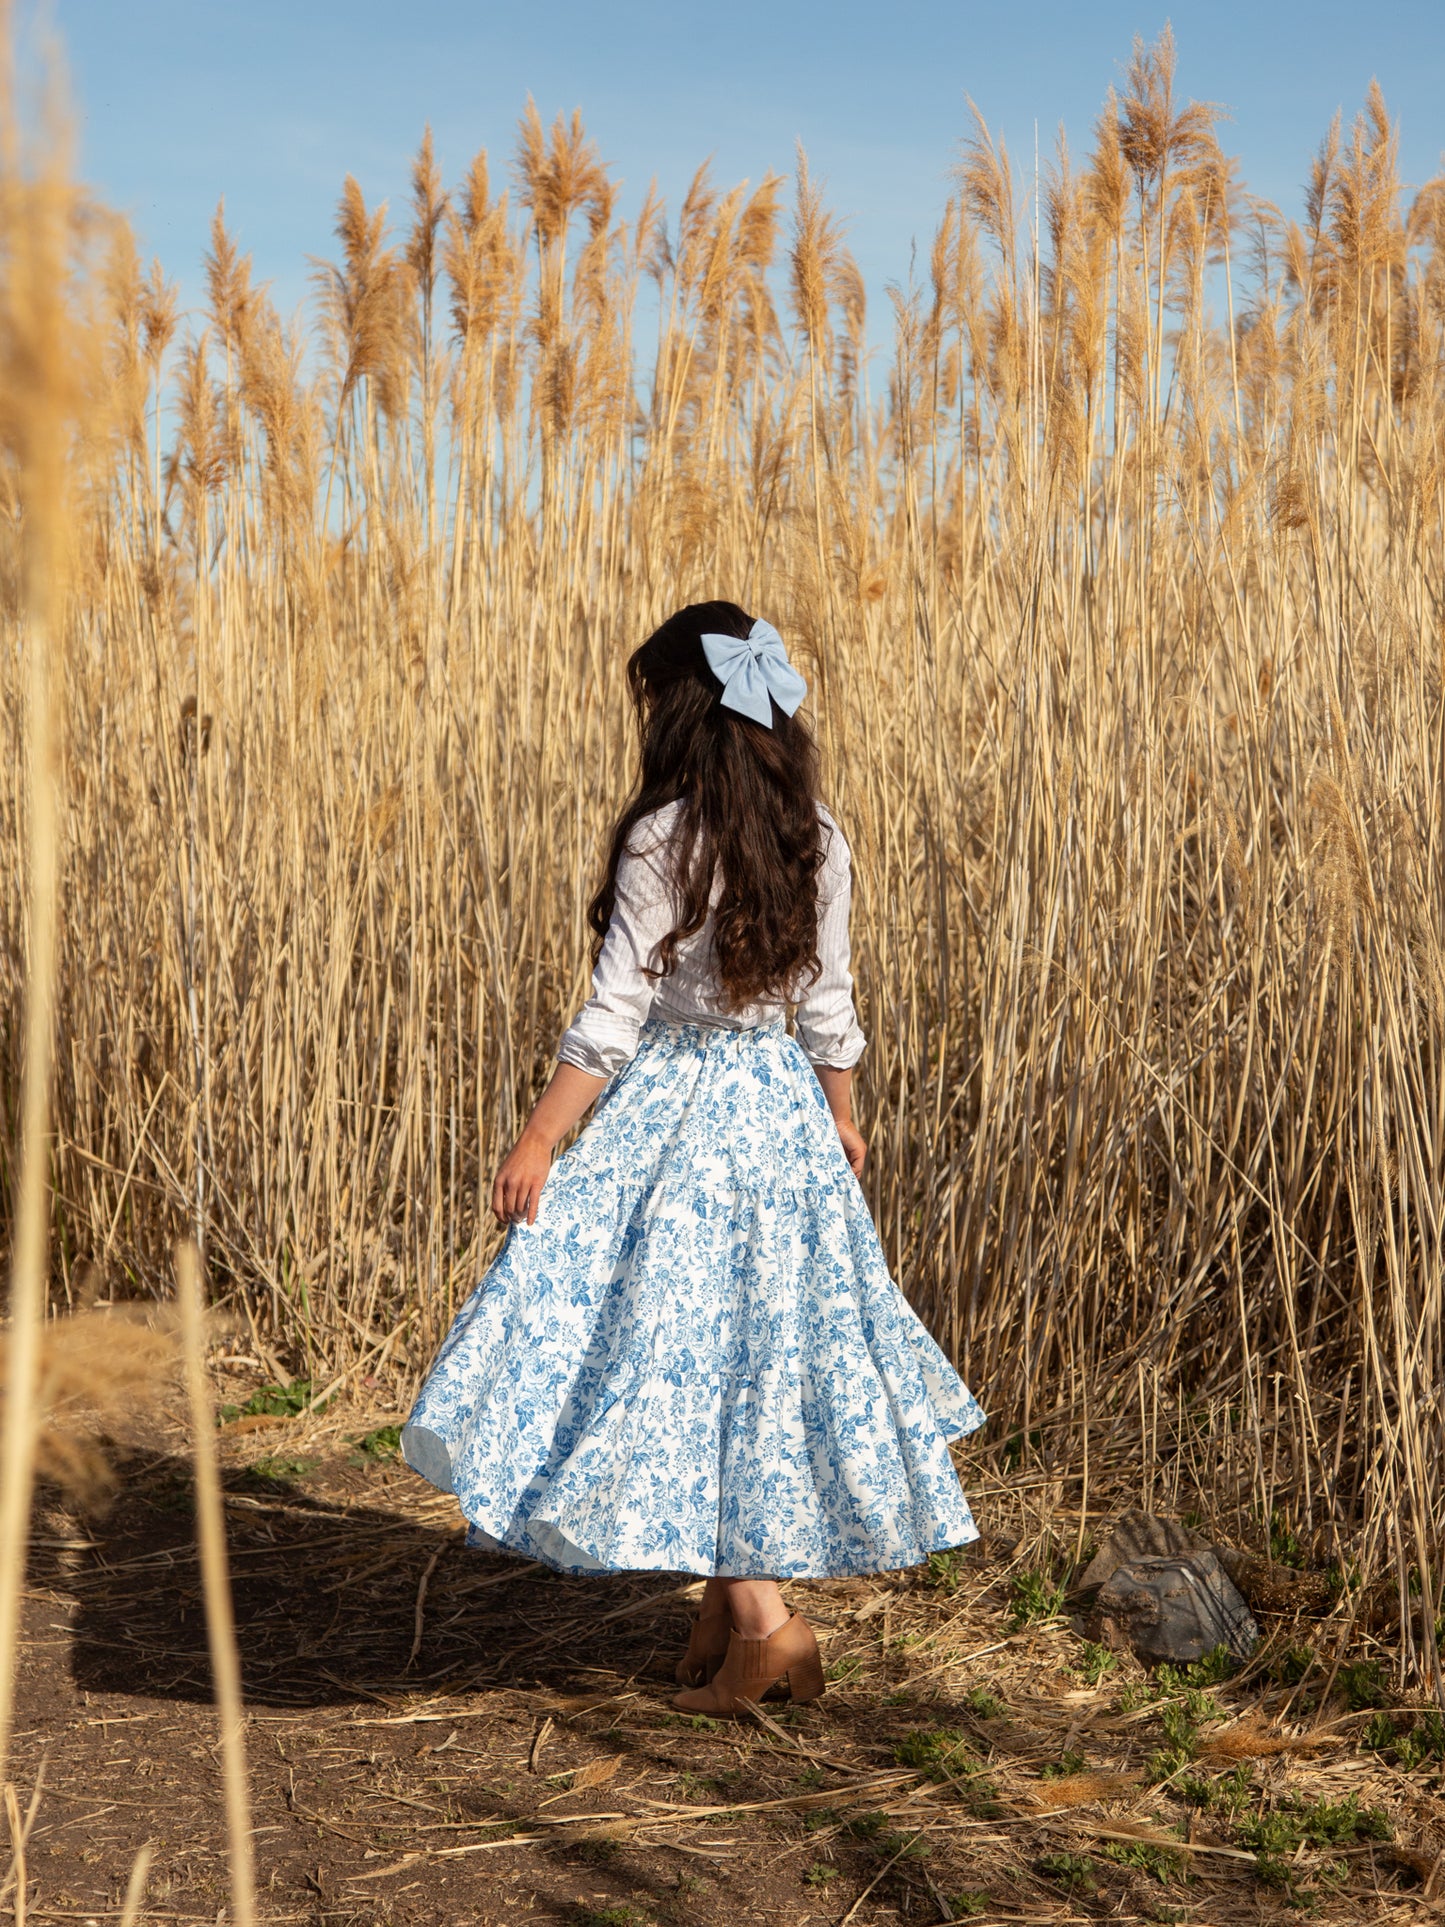 The Madonna Skirt in Countryside